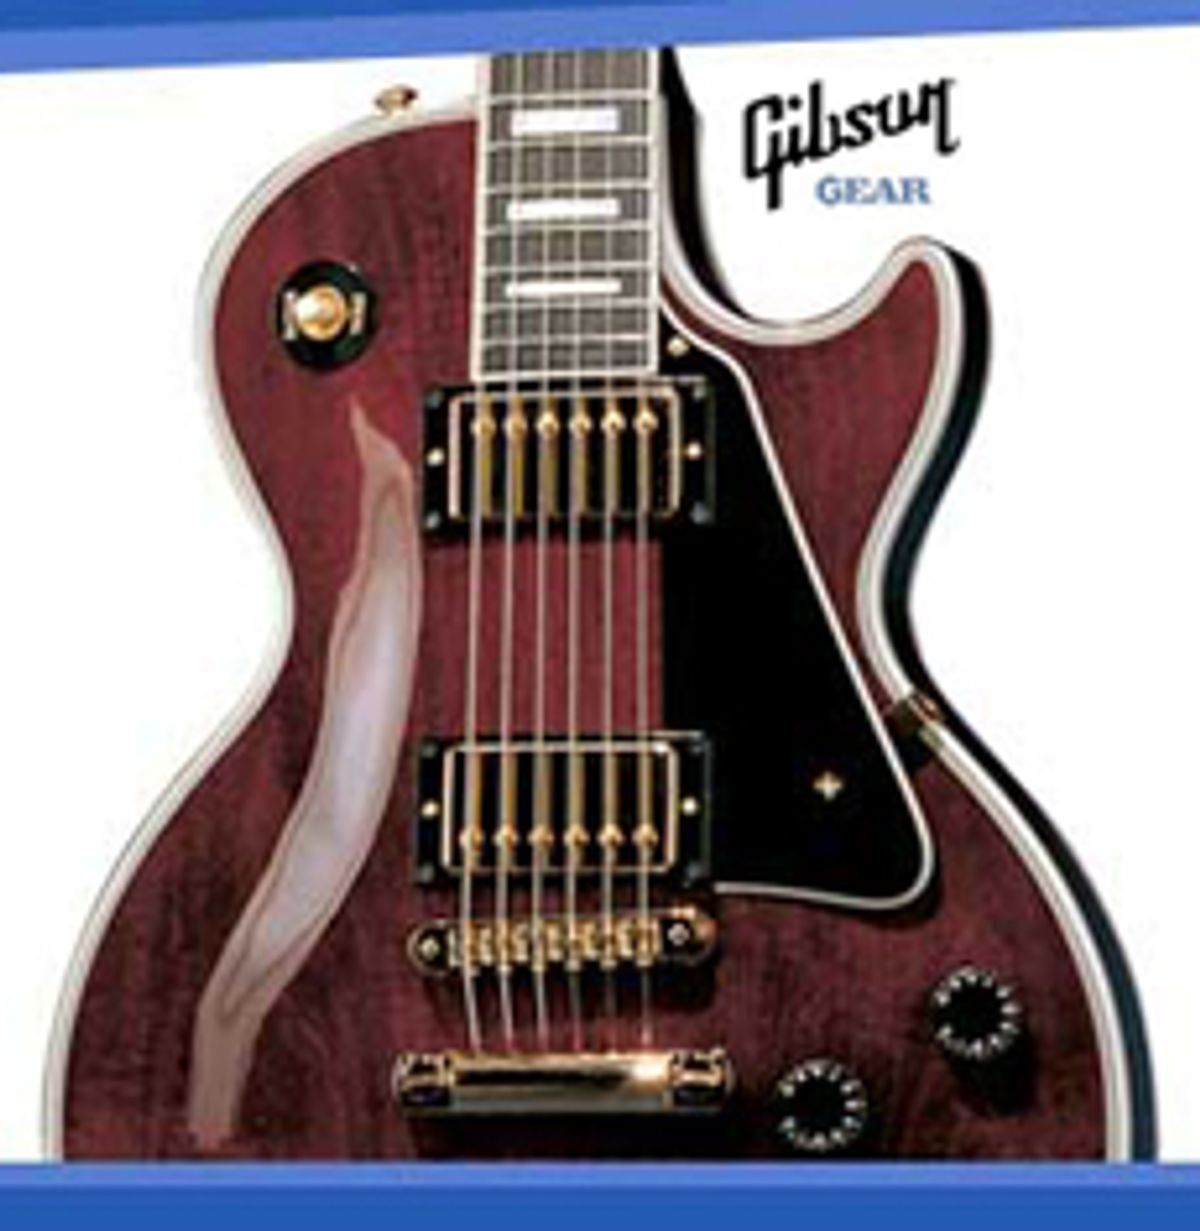 Gibson "Extreme Guitar Makeover" Contest